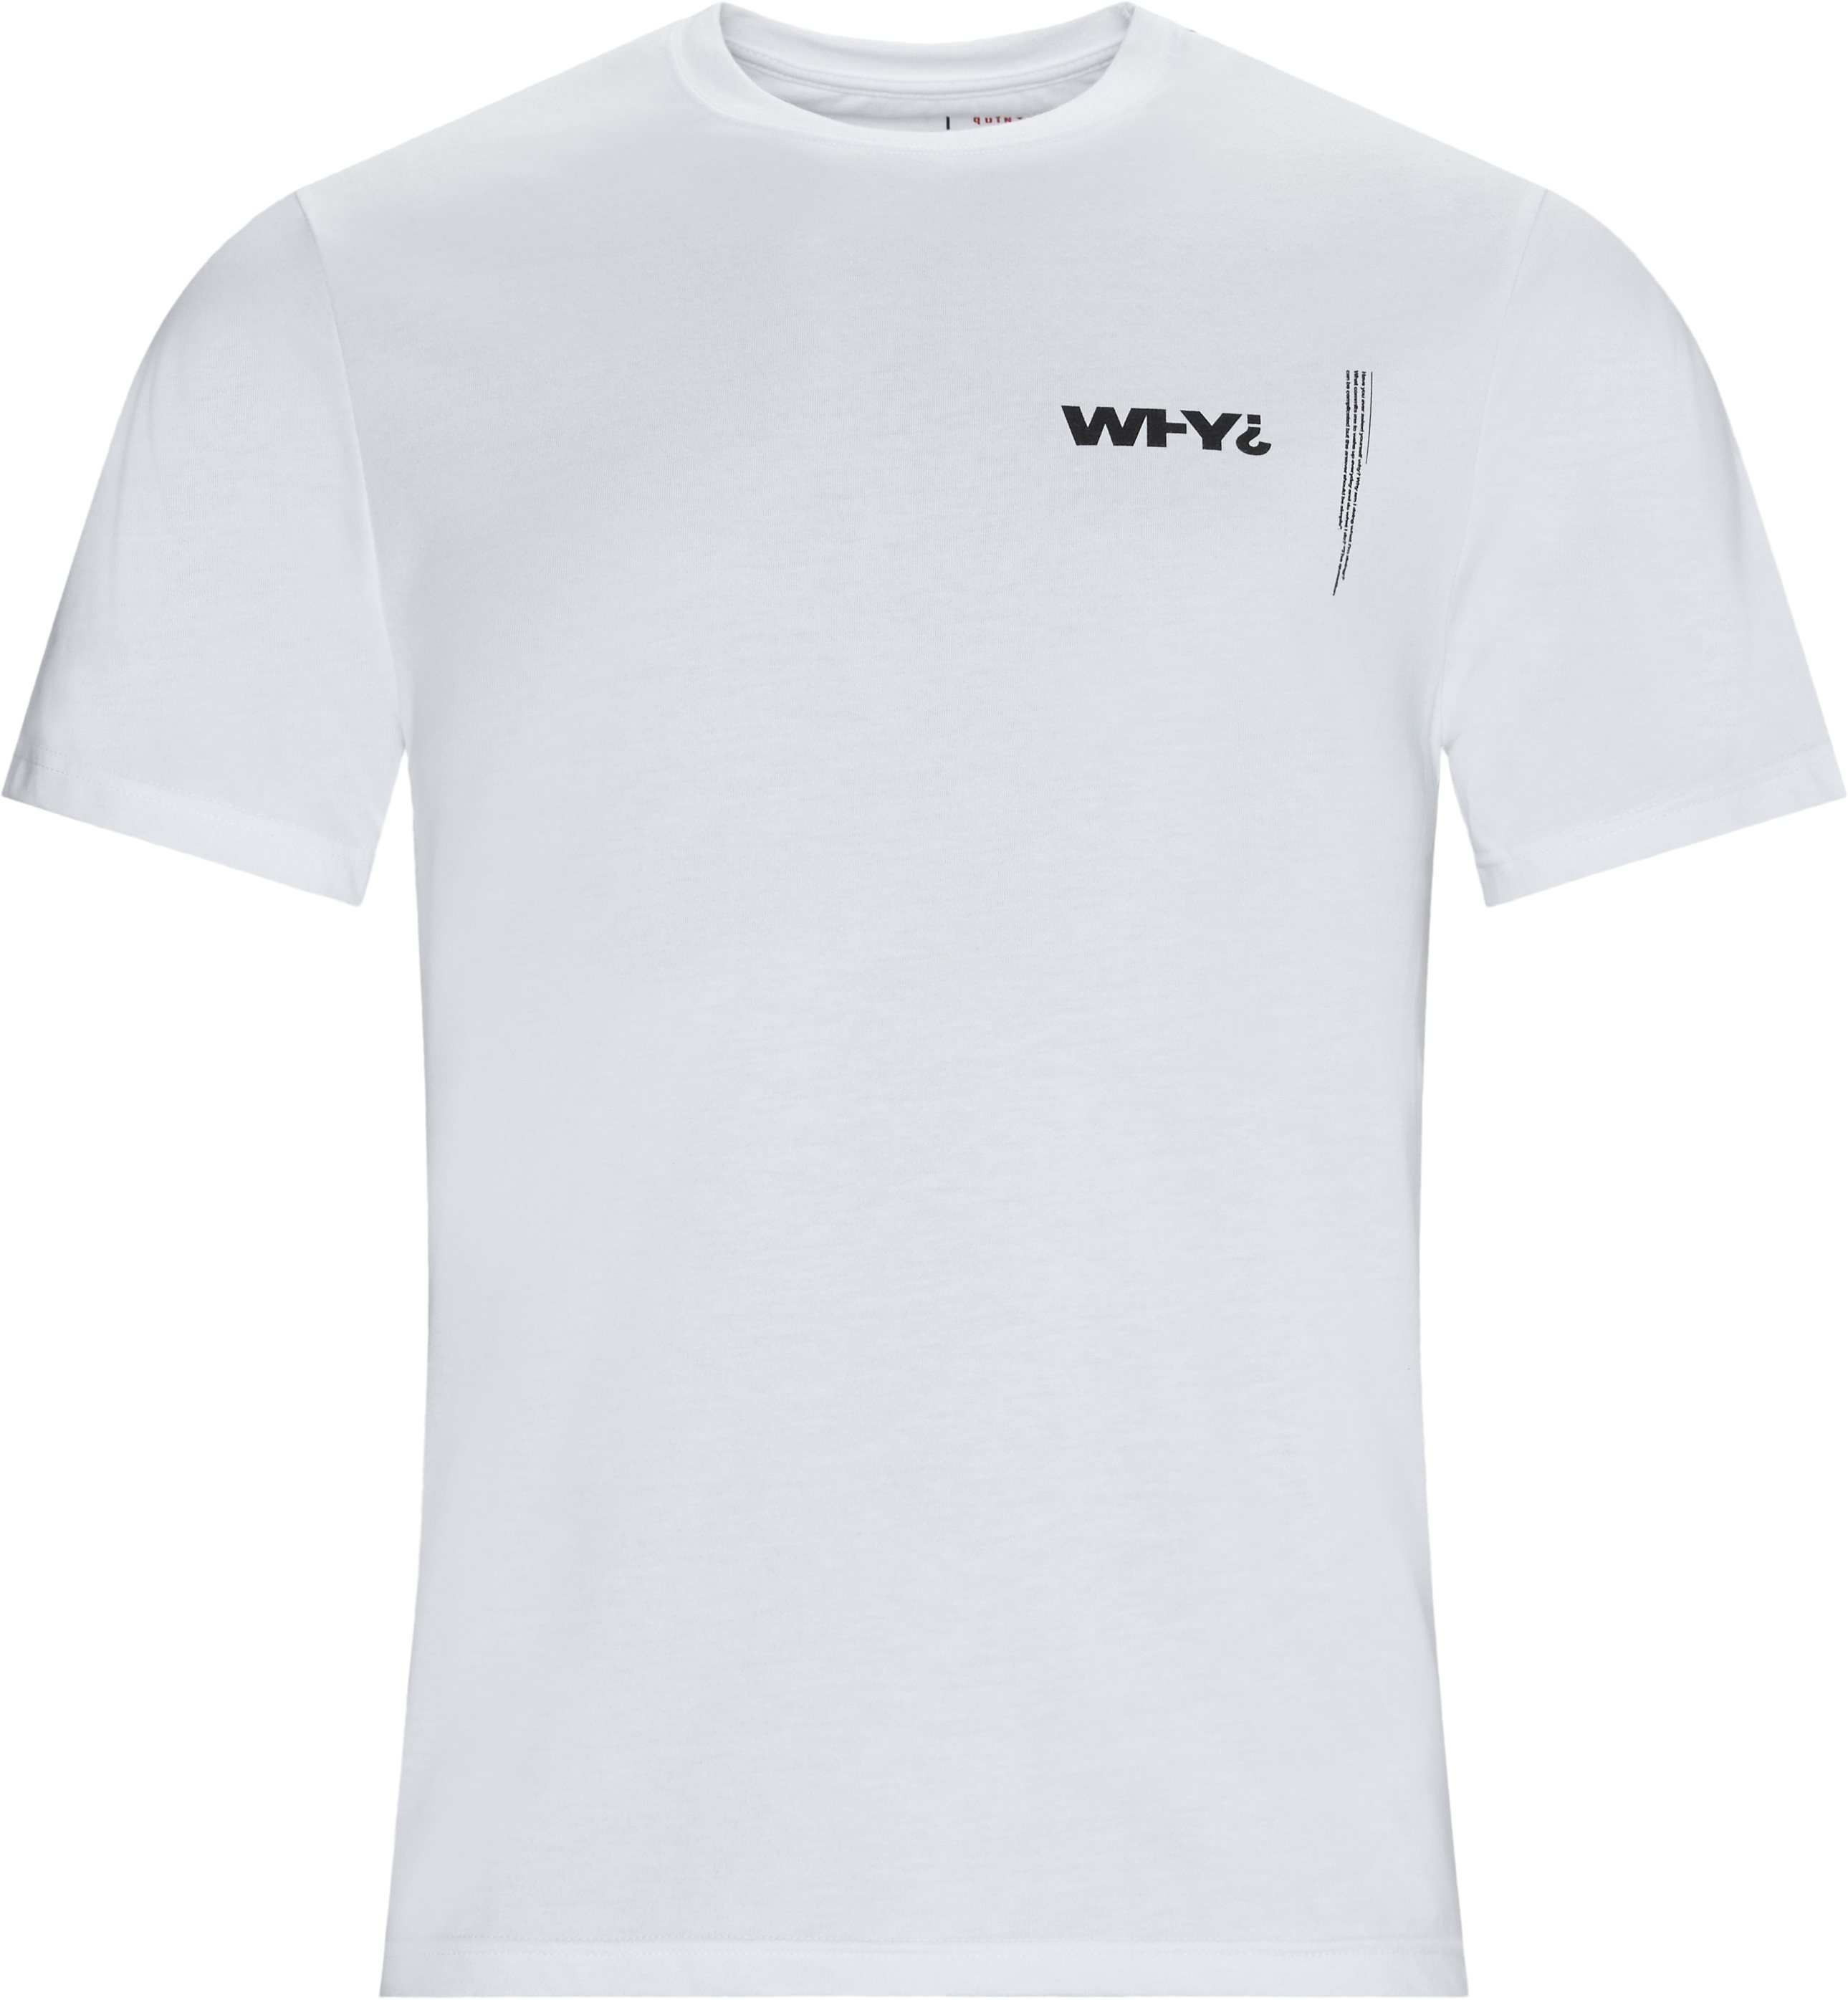 Why Tee - T-shirts - Regular fit - White